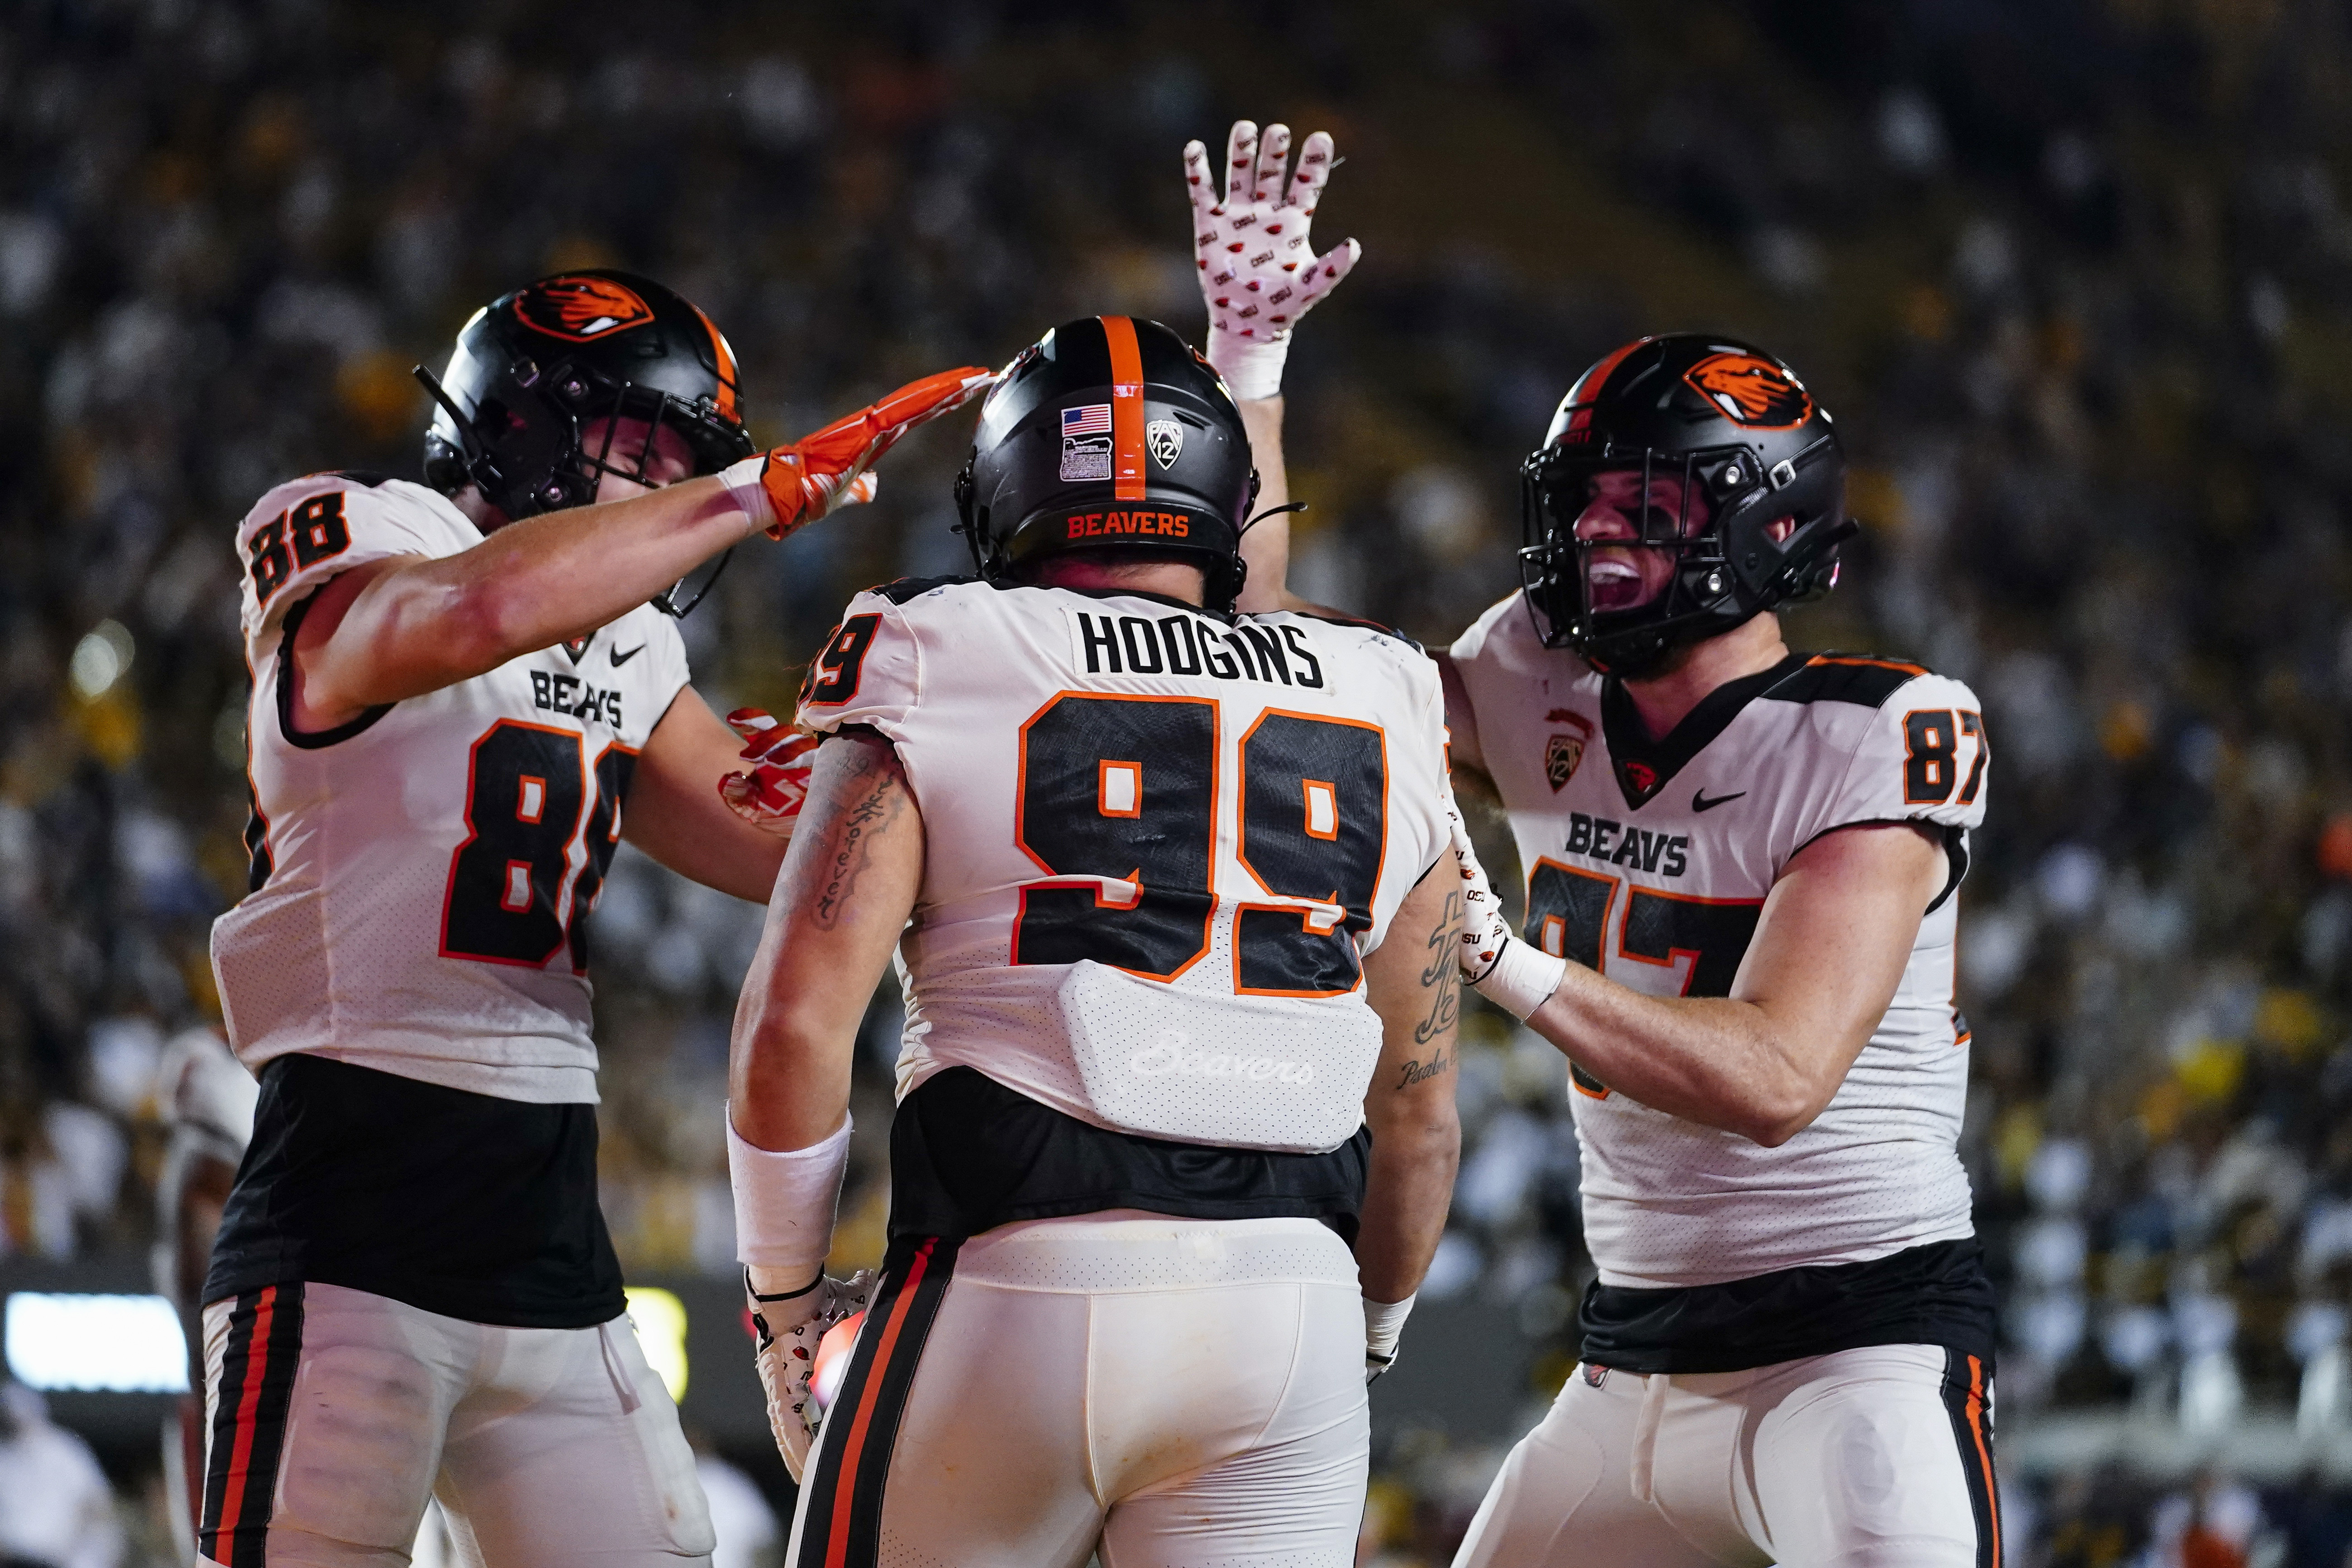 Oregon State, Washington State say Pac-12's actions show departing